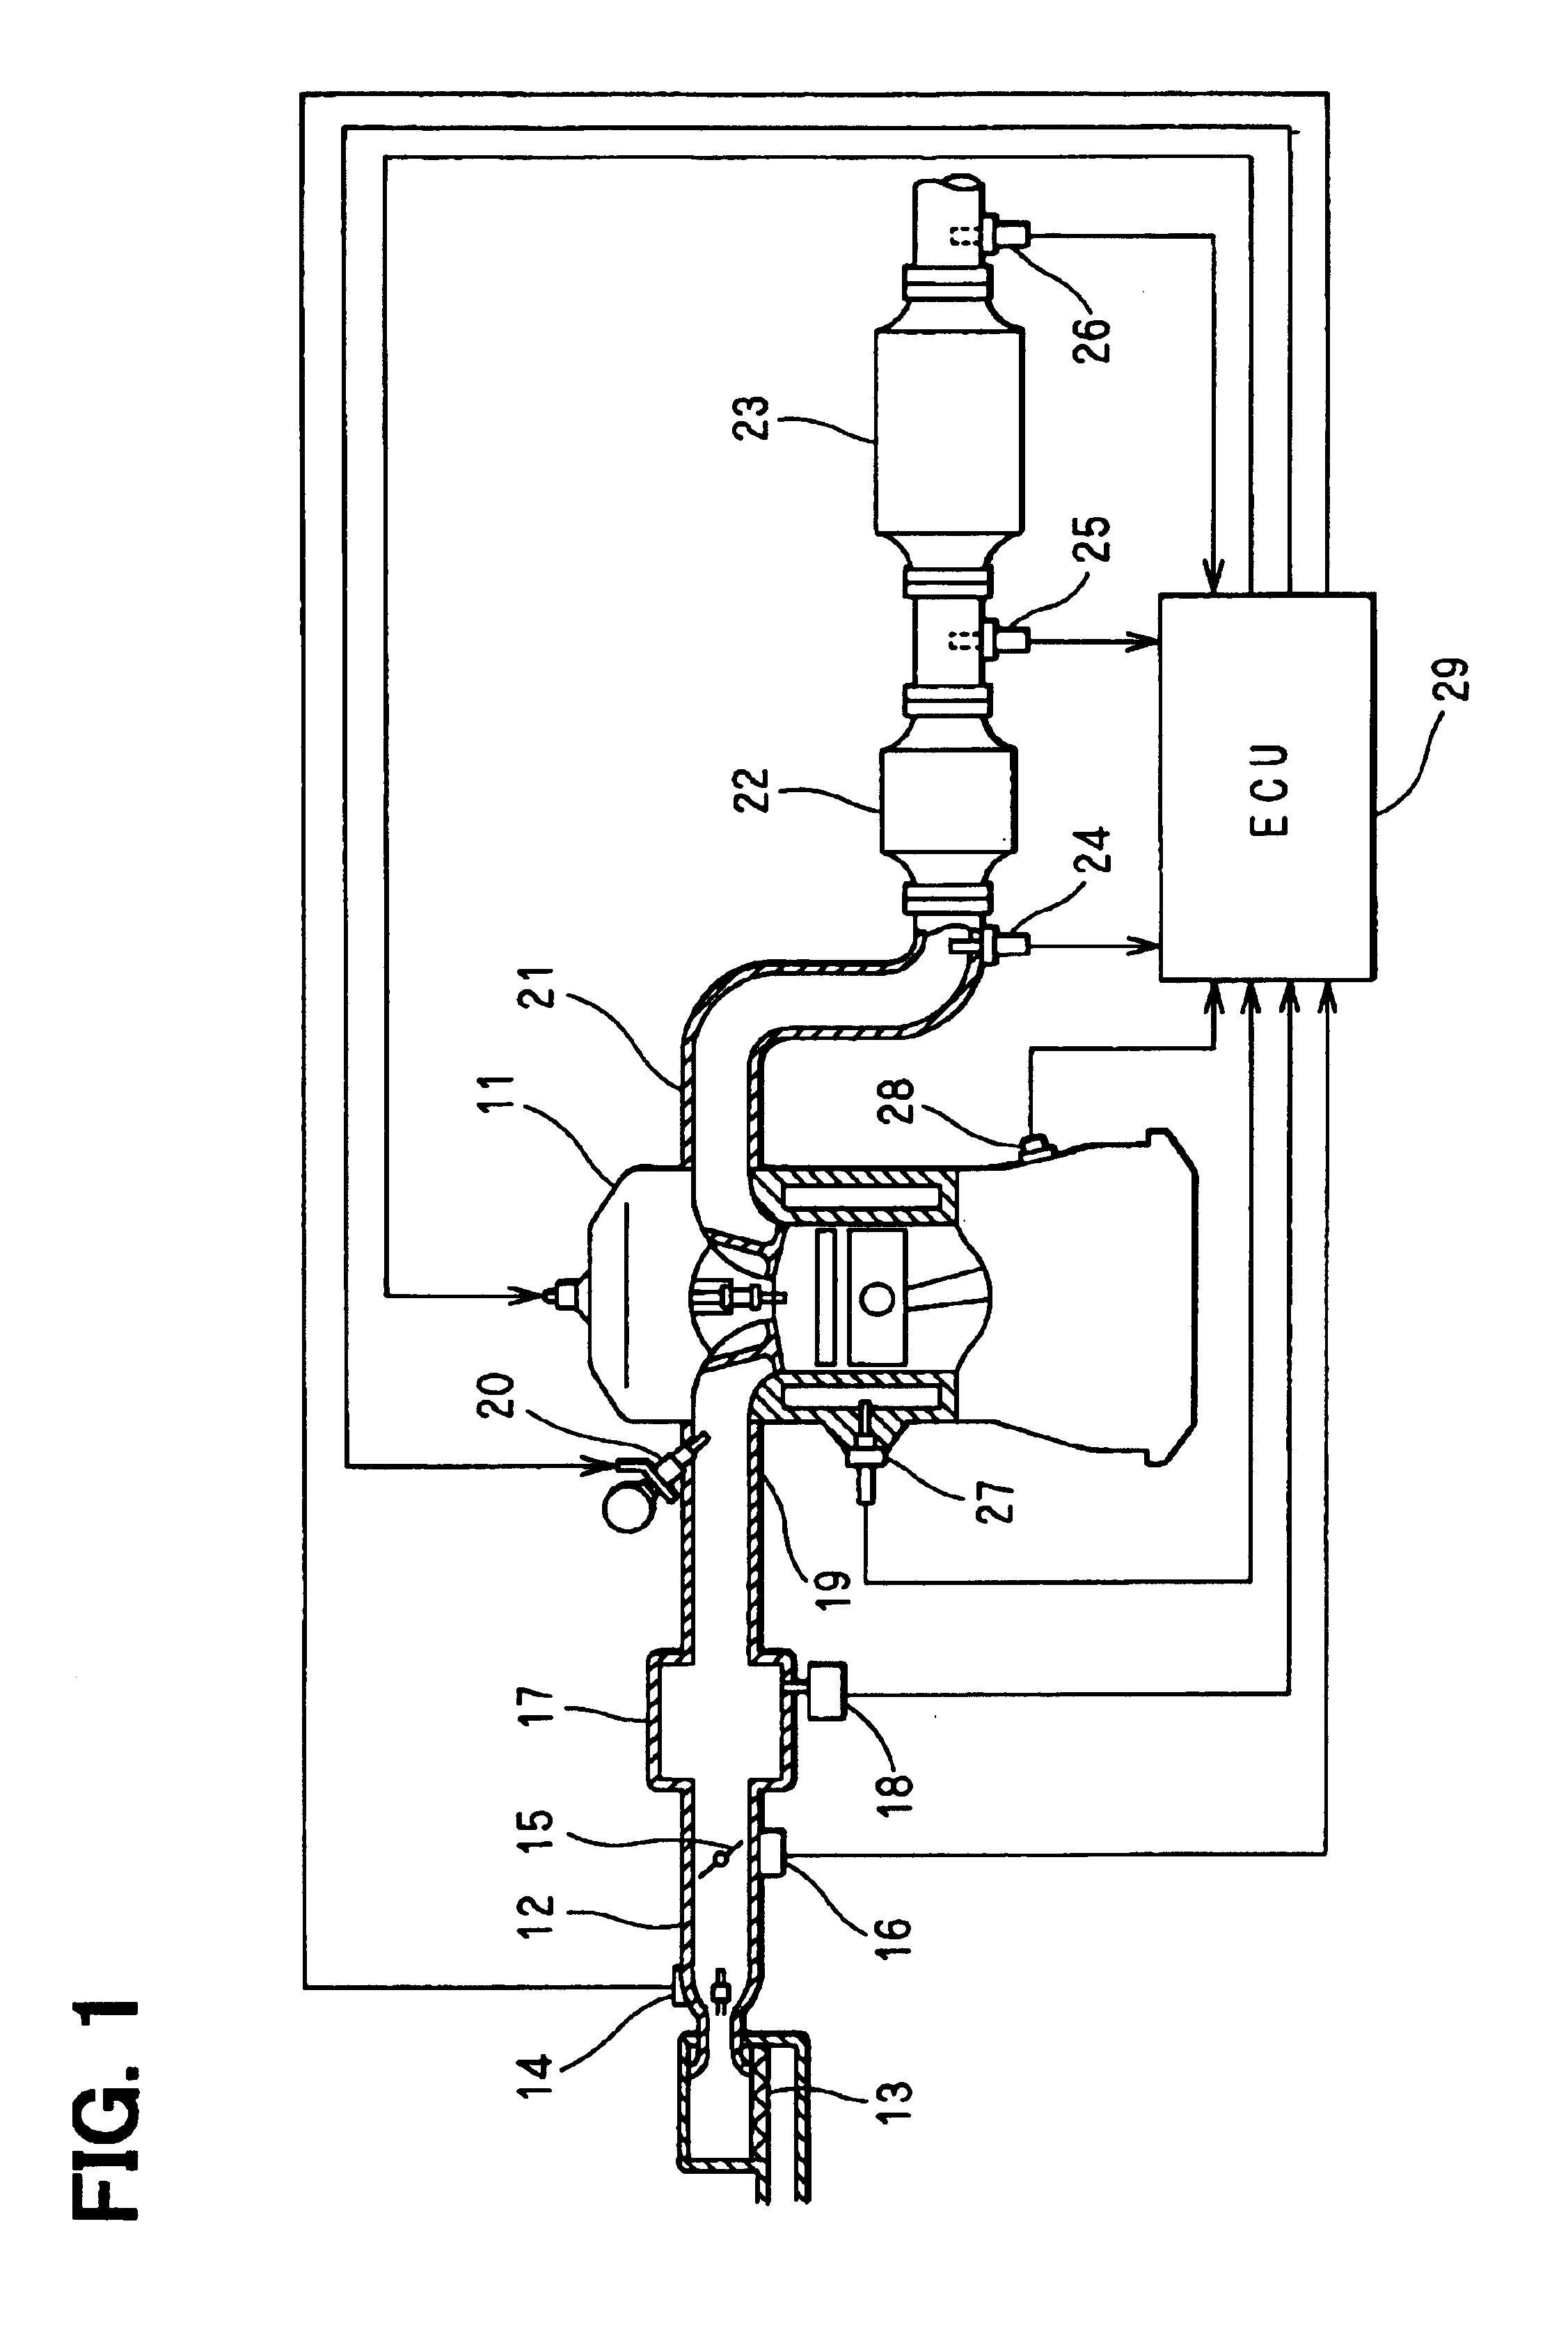 Exhaust gas purifying system for internal combustion engines